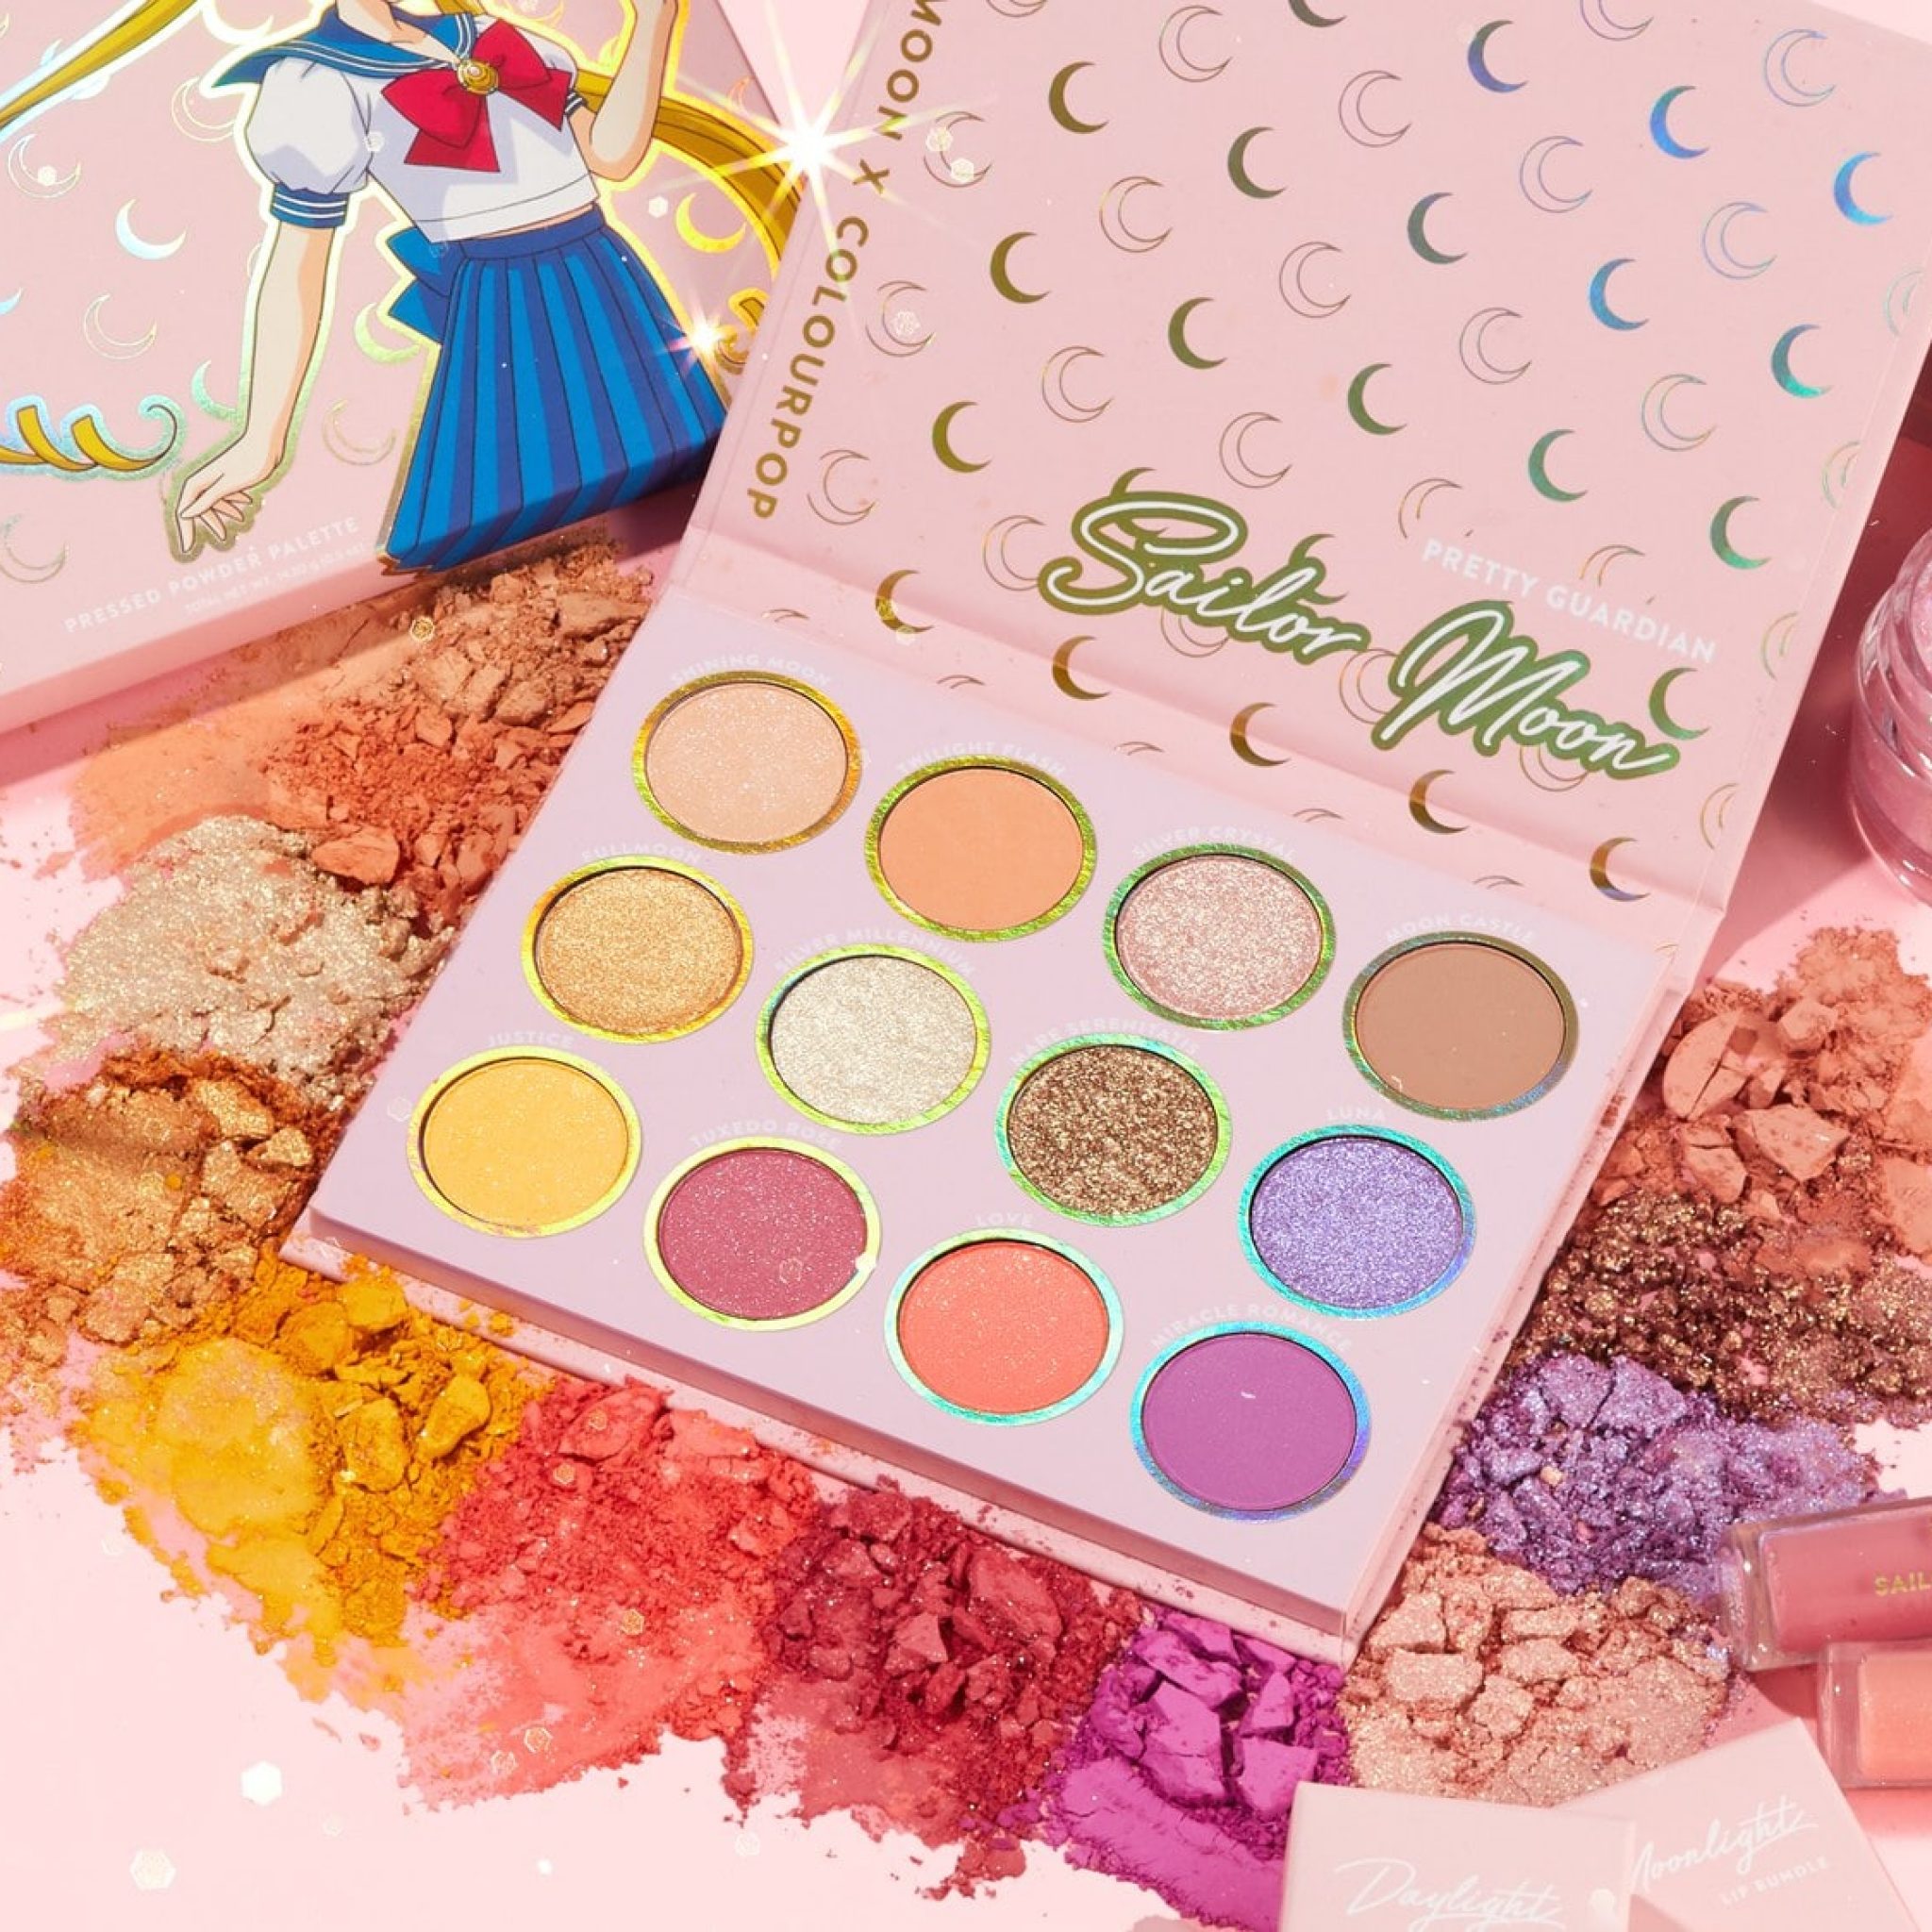 FULL SAILOR MOON x COLOURPOP COLLECTION REVIEW 🌙 Tryon, Swatches & Demo